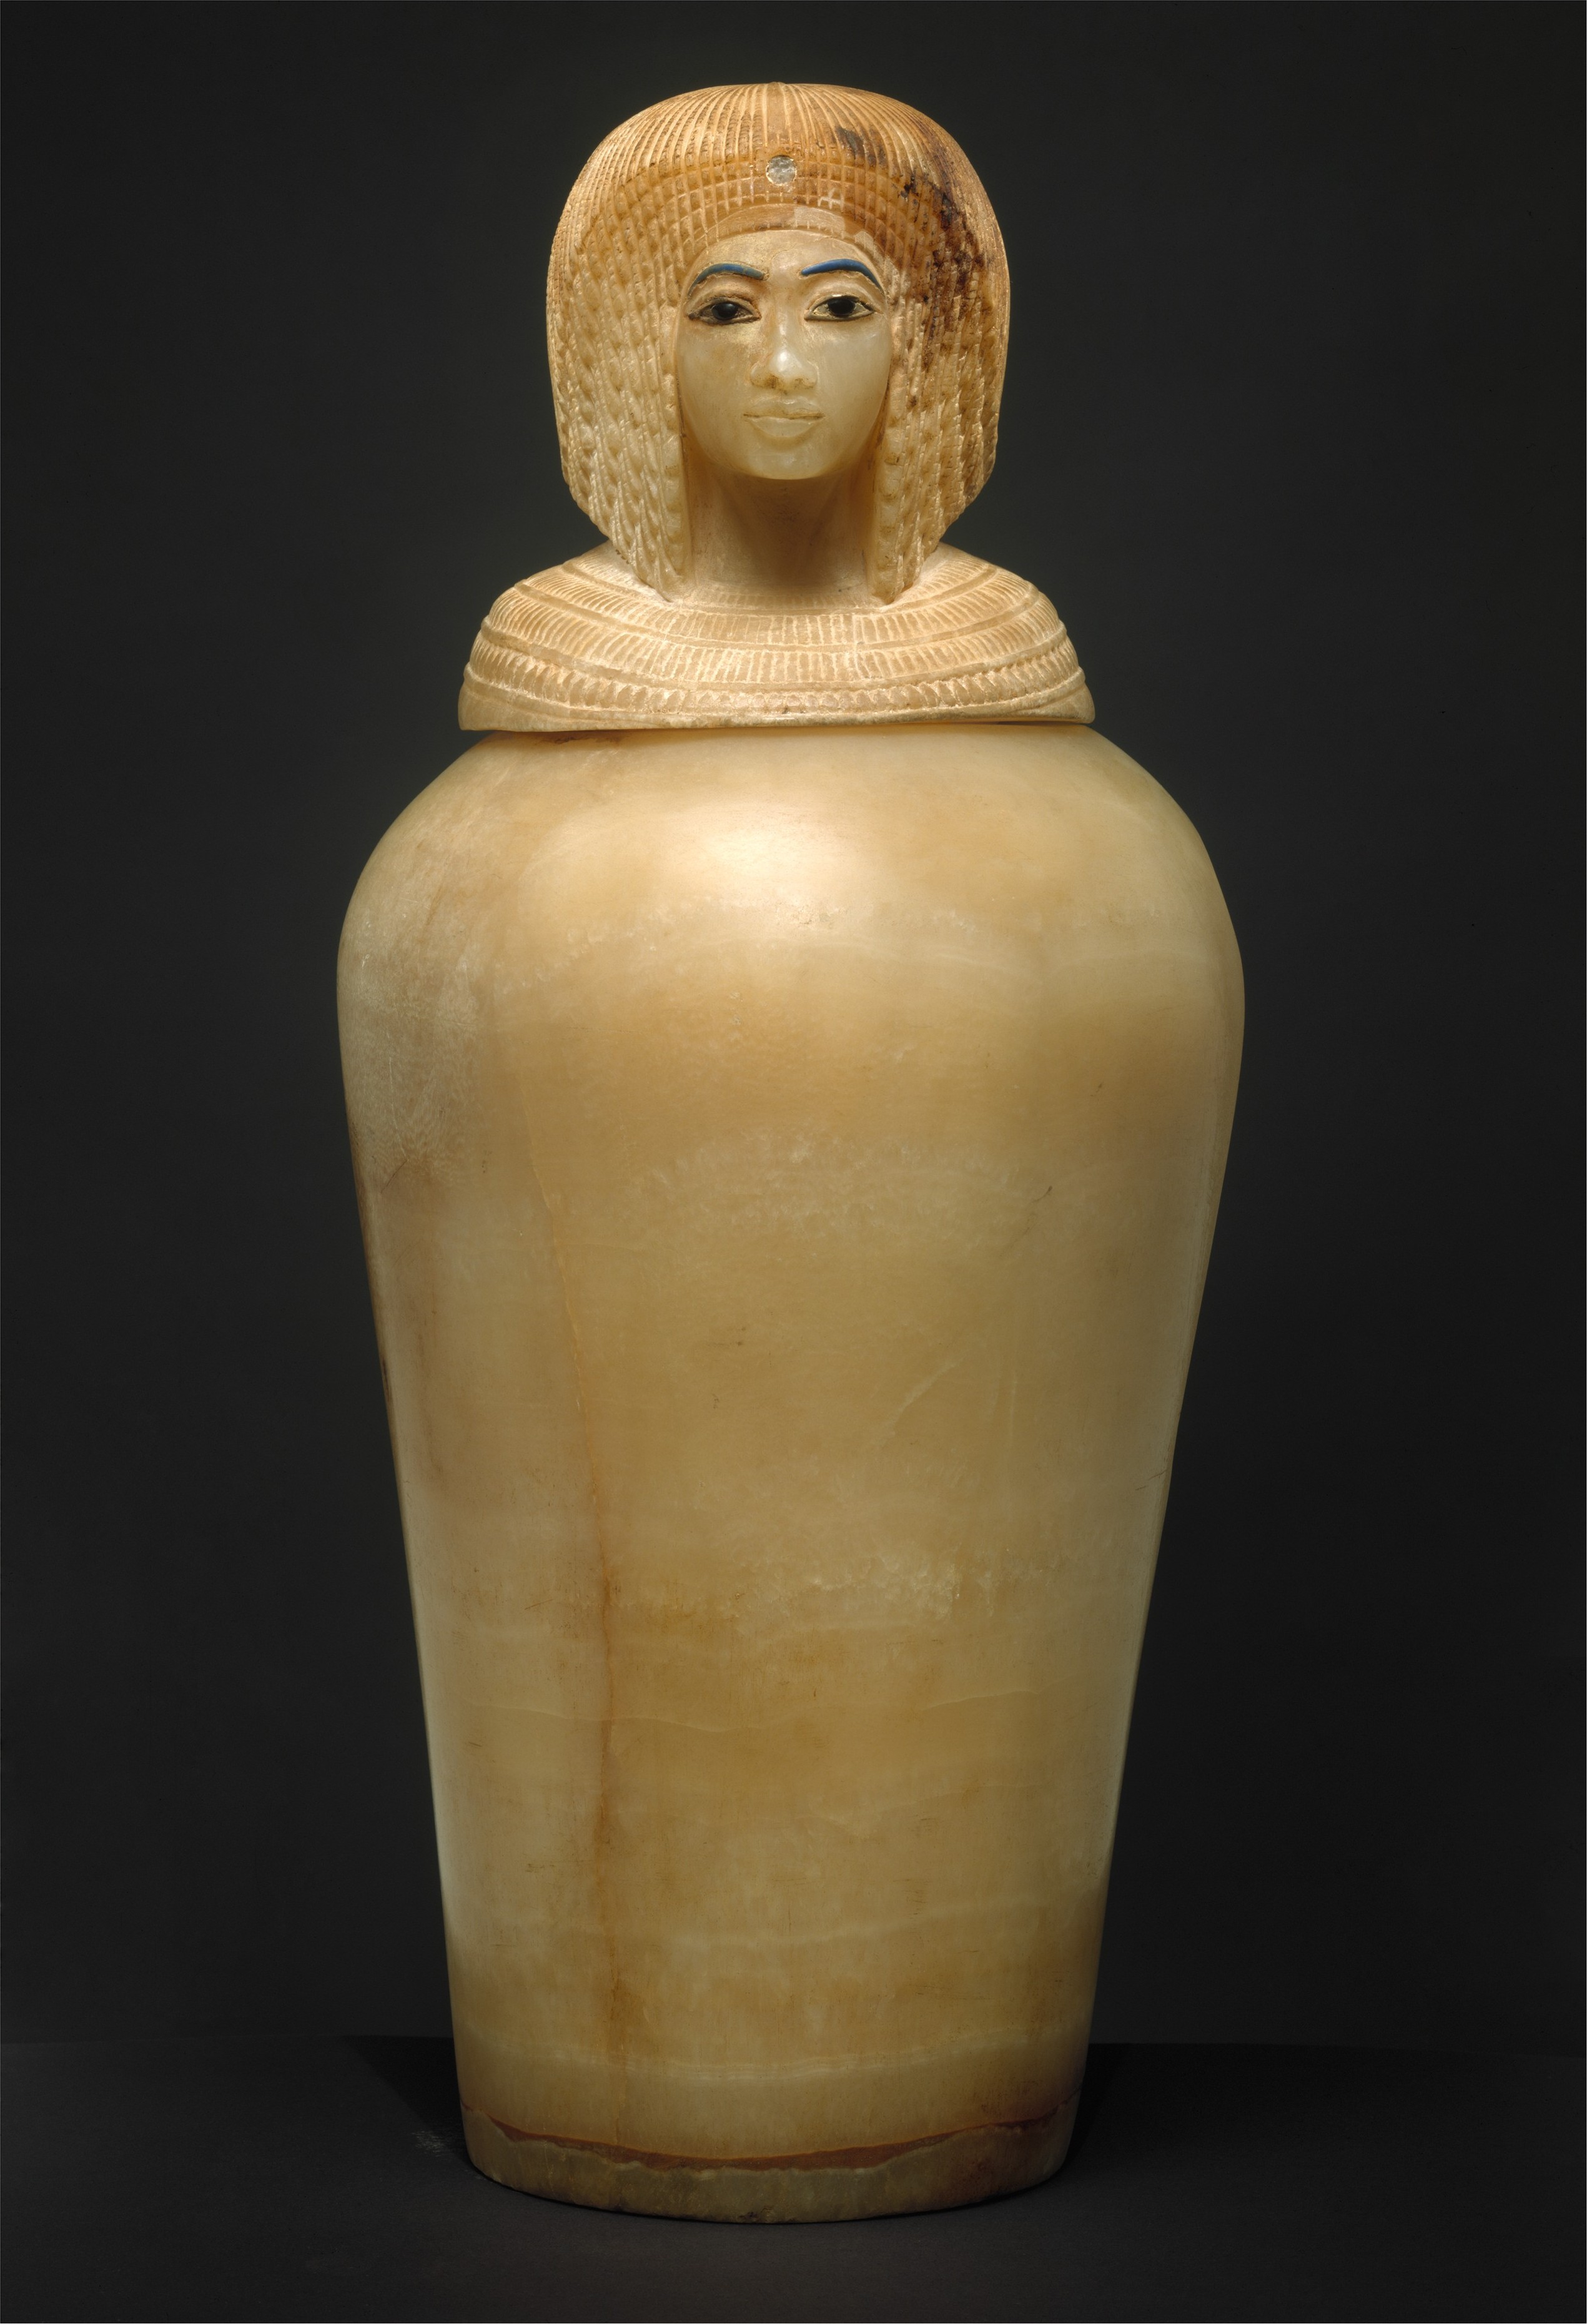 Canopic Jar 07 226 1 With A Lid In The Shape Of A Royal Woman S Head 30 8 54 New Kingdom Amarna Period The Metropolitan Museum Of Art